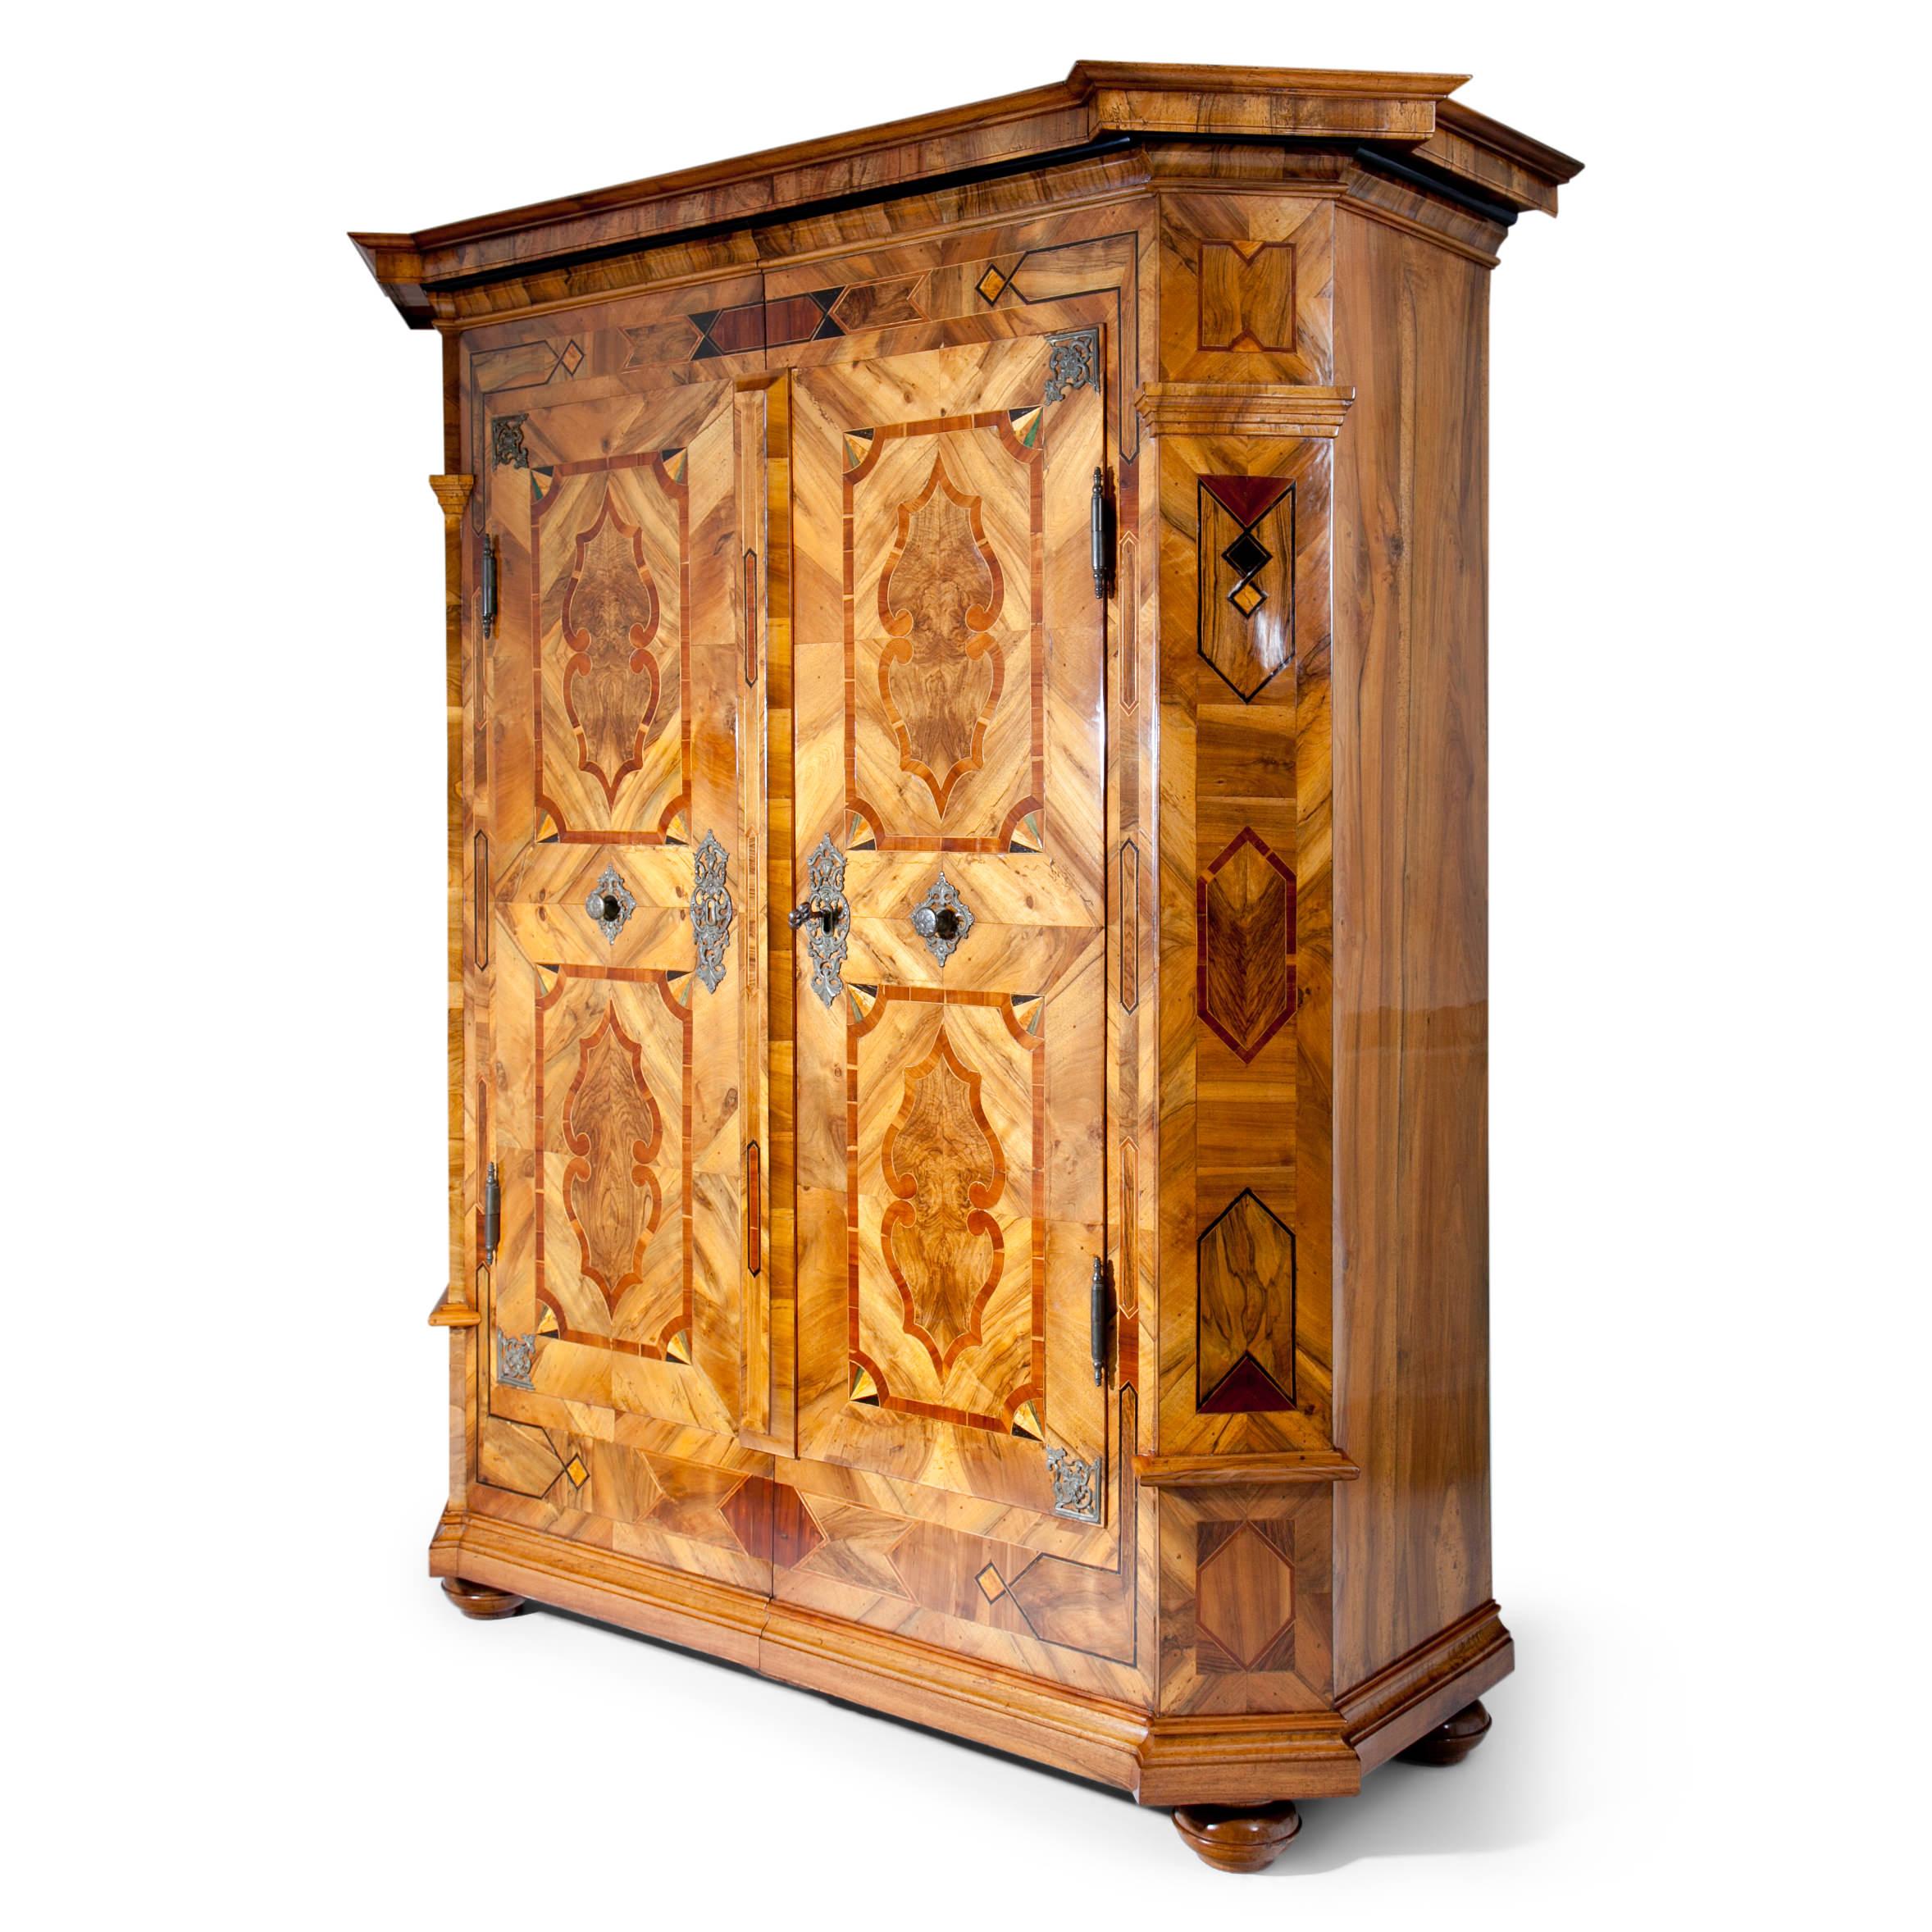 Two-doored baroque cabinet on bun feet with a profiled base and a protruding pediment. The beveled corners are decorated with pilasters. The doors show cast iron fittings in each corner as well as pull handles and escutcheons. Very beautiful walnut